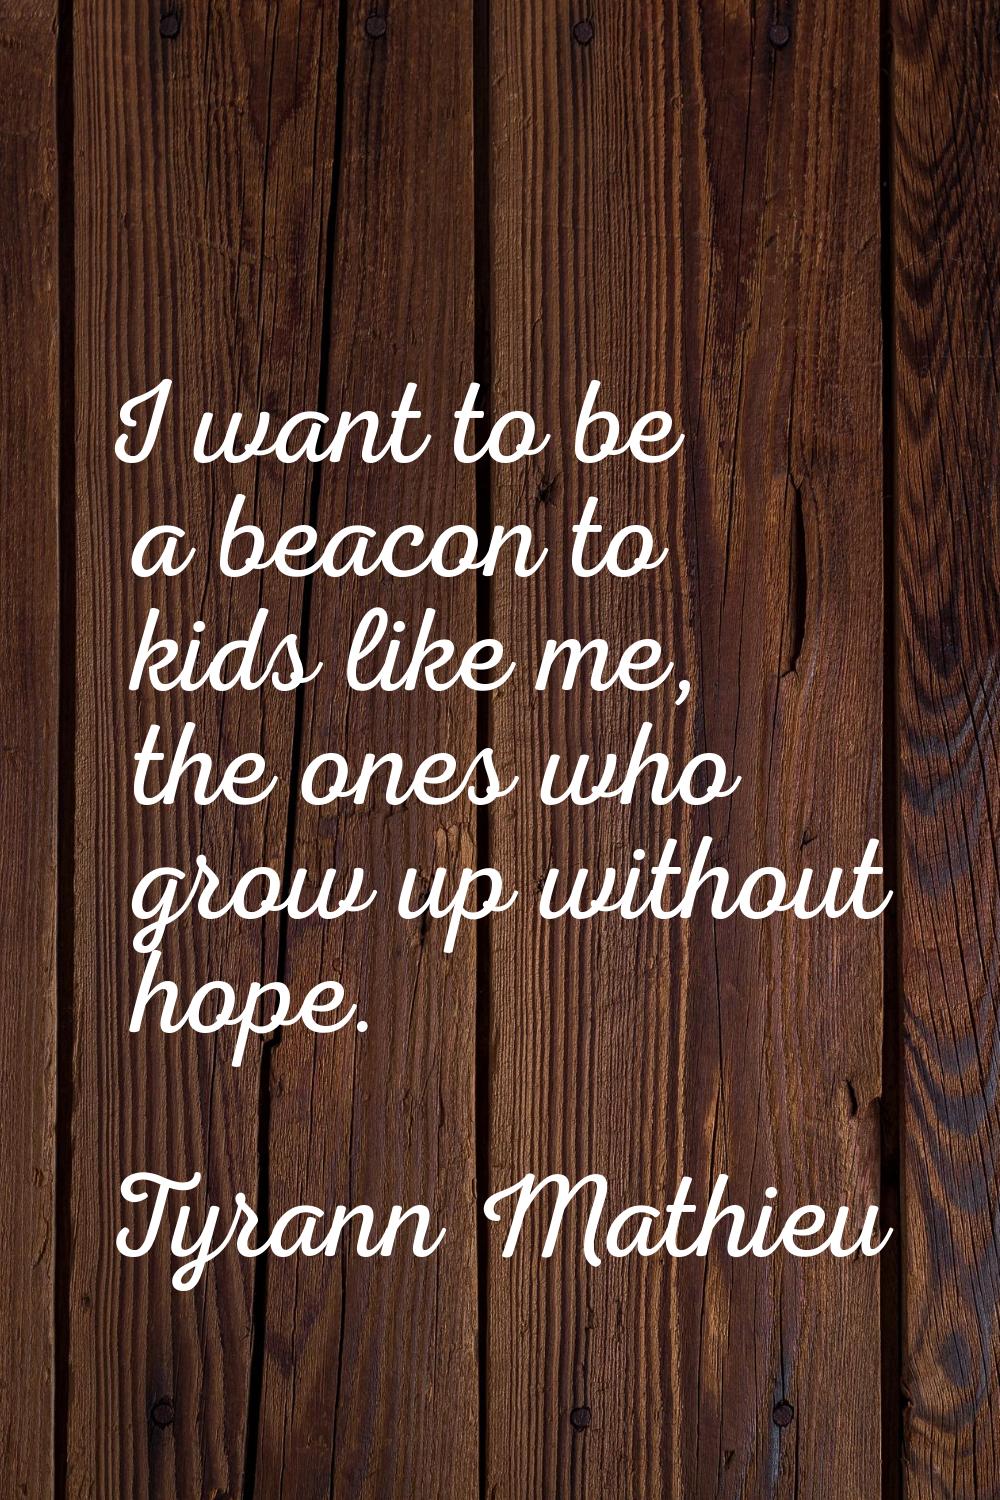 I want to be a beacon to kids like me, the ones who grow up without hope.